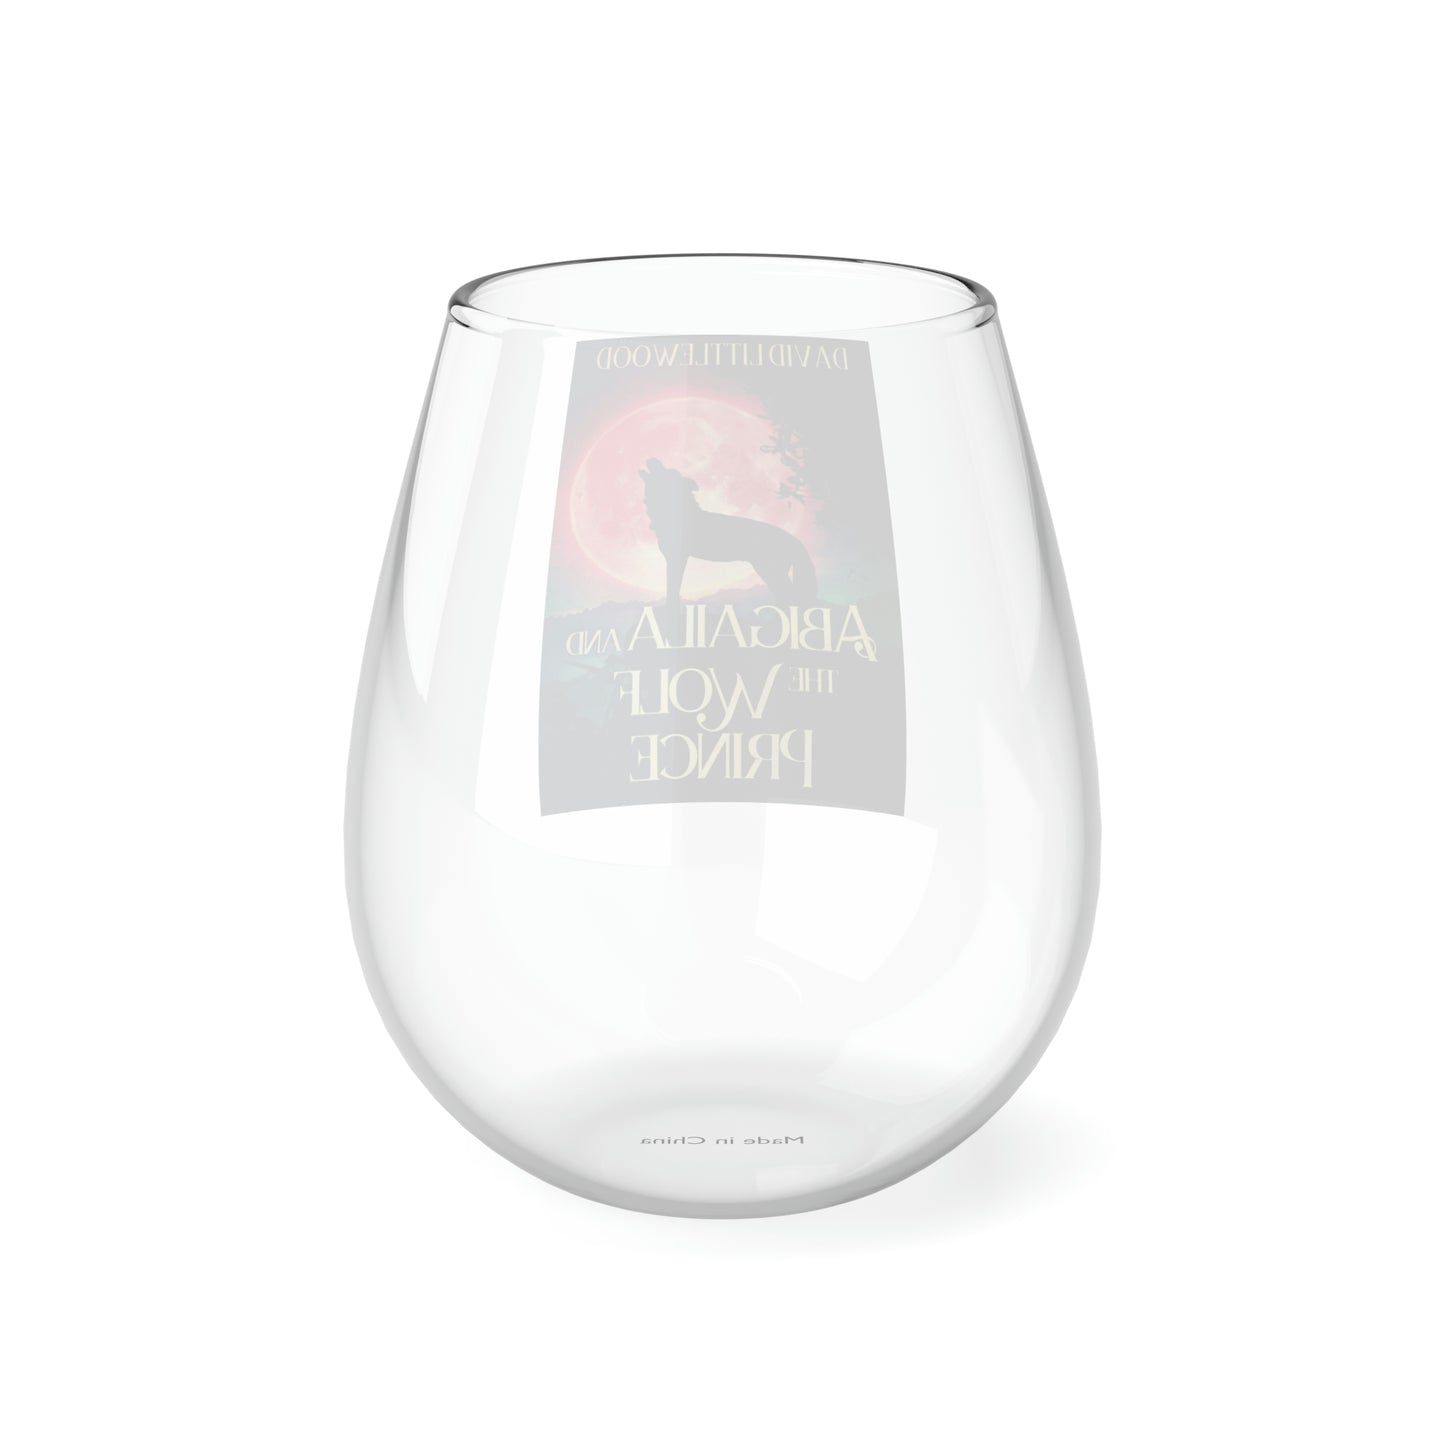 Abigaila And The Wolf Prince - Stemless Wine Glass, 11.75oz